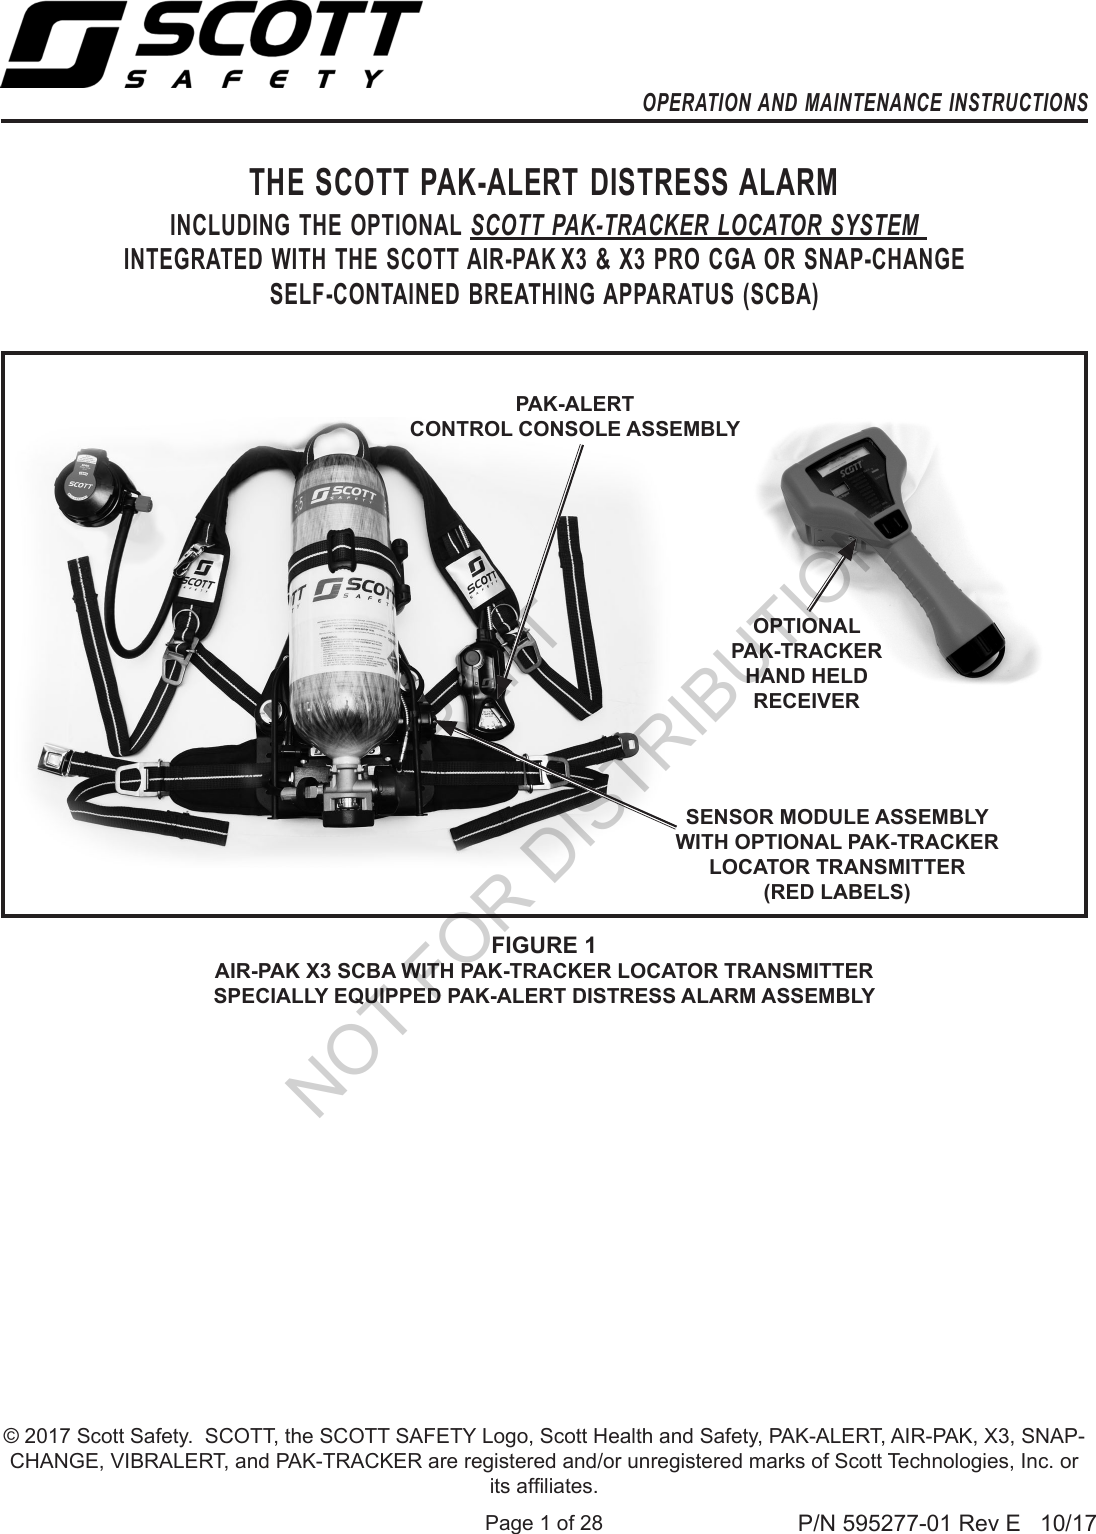 Page 1 of 28 P/N 595277-01 Rev E   10/17THE SCOTT PAK-ALERT DISTRESS ALARM INCLUDING THE OPTIONAL SCOTT PAK-TRACKER LOCATOR SYSTEM INTEGRATED WITH THE SCOTT AIR-PAK X3 &amp; X3 PRO CGA OR SNAP-CHANGESELF-CONTAINED BREATHING APPARATUS (SCBA) FIGURE 1AIR-PAK X3 SCBA WITH PAK-TRACKER LOCATOR TRANSMITTER SPECIALLY EQUIPPED PAK-ALERT DISTRESS ALARM ASSEMBLYPAK-ALERT CONTROL CONSOLE ASSEMBLYSENSOR MODULE ASSEMBLY WITH OPTIONAL PAK-TRACKER LOCATOR TRANSMITTER (RED LABELS)OPTIONAL PAK-TRACKER HAND HELD RECEIVER© 2017 Scott Safety.  SCOTT, the SCOTT SAFETY Logo, Scott Health and Safety, PAK-ALERT, AIR-PAK, X3, SNAP-CHANGE, VIBRALERT, and PAK-TRACKER are registered and/or unregistered marks of Scott Technologies, Inc. or its afliates.OPERATION AND MAINTENANCE INSTRUCTIONS DRAFT  NOT FOR DISTRIBUTION